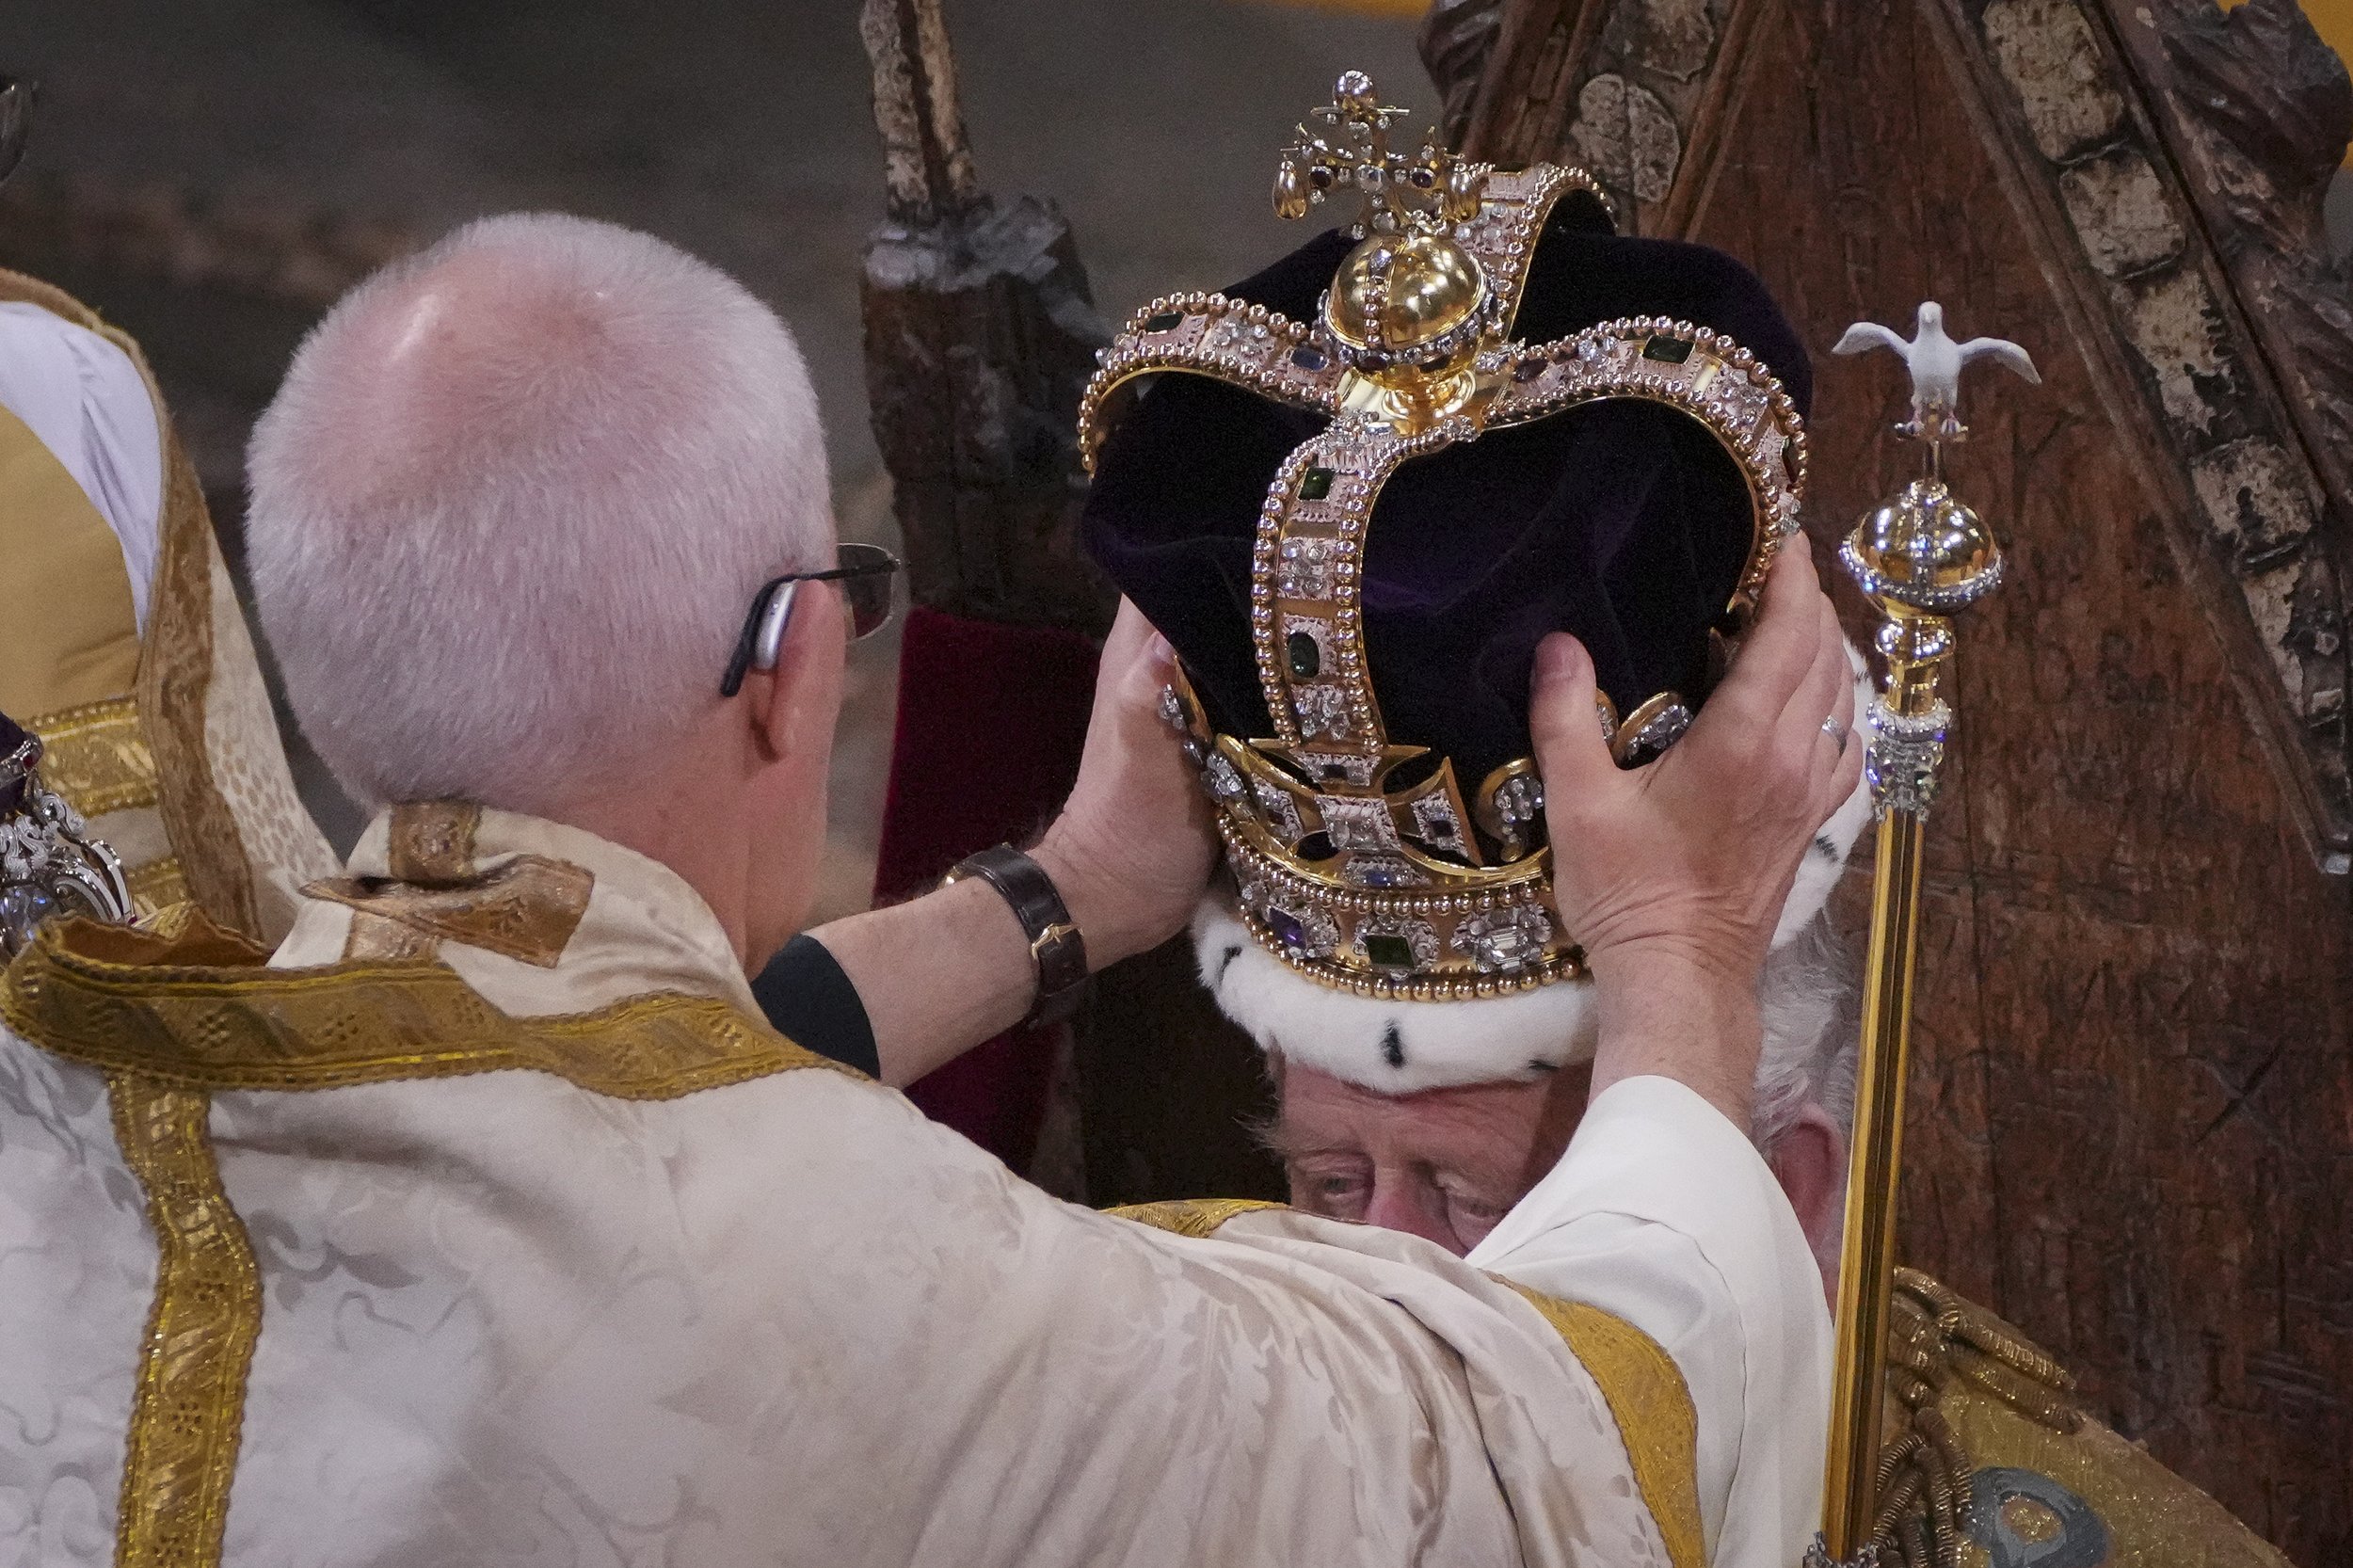  King Charles III, seated in St Edward's Chair, also known as the Coronation Chair, is crowned with St Edward's Crown by The Archbishop of Canterbury the Most Reverend Justin Welby during his coronation ceremony in Westminster Abbey, London. The King